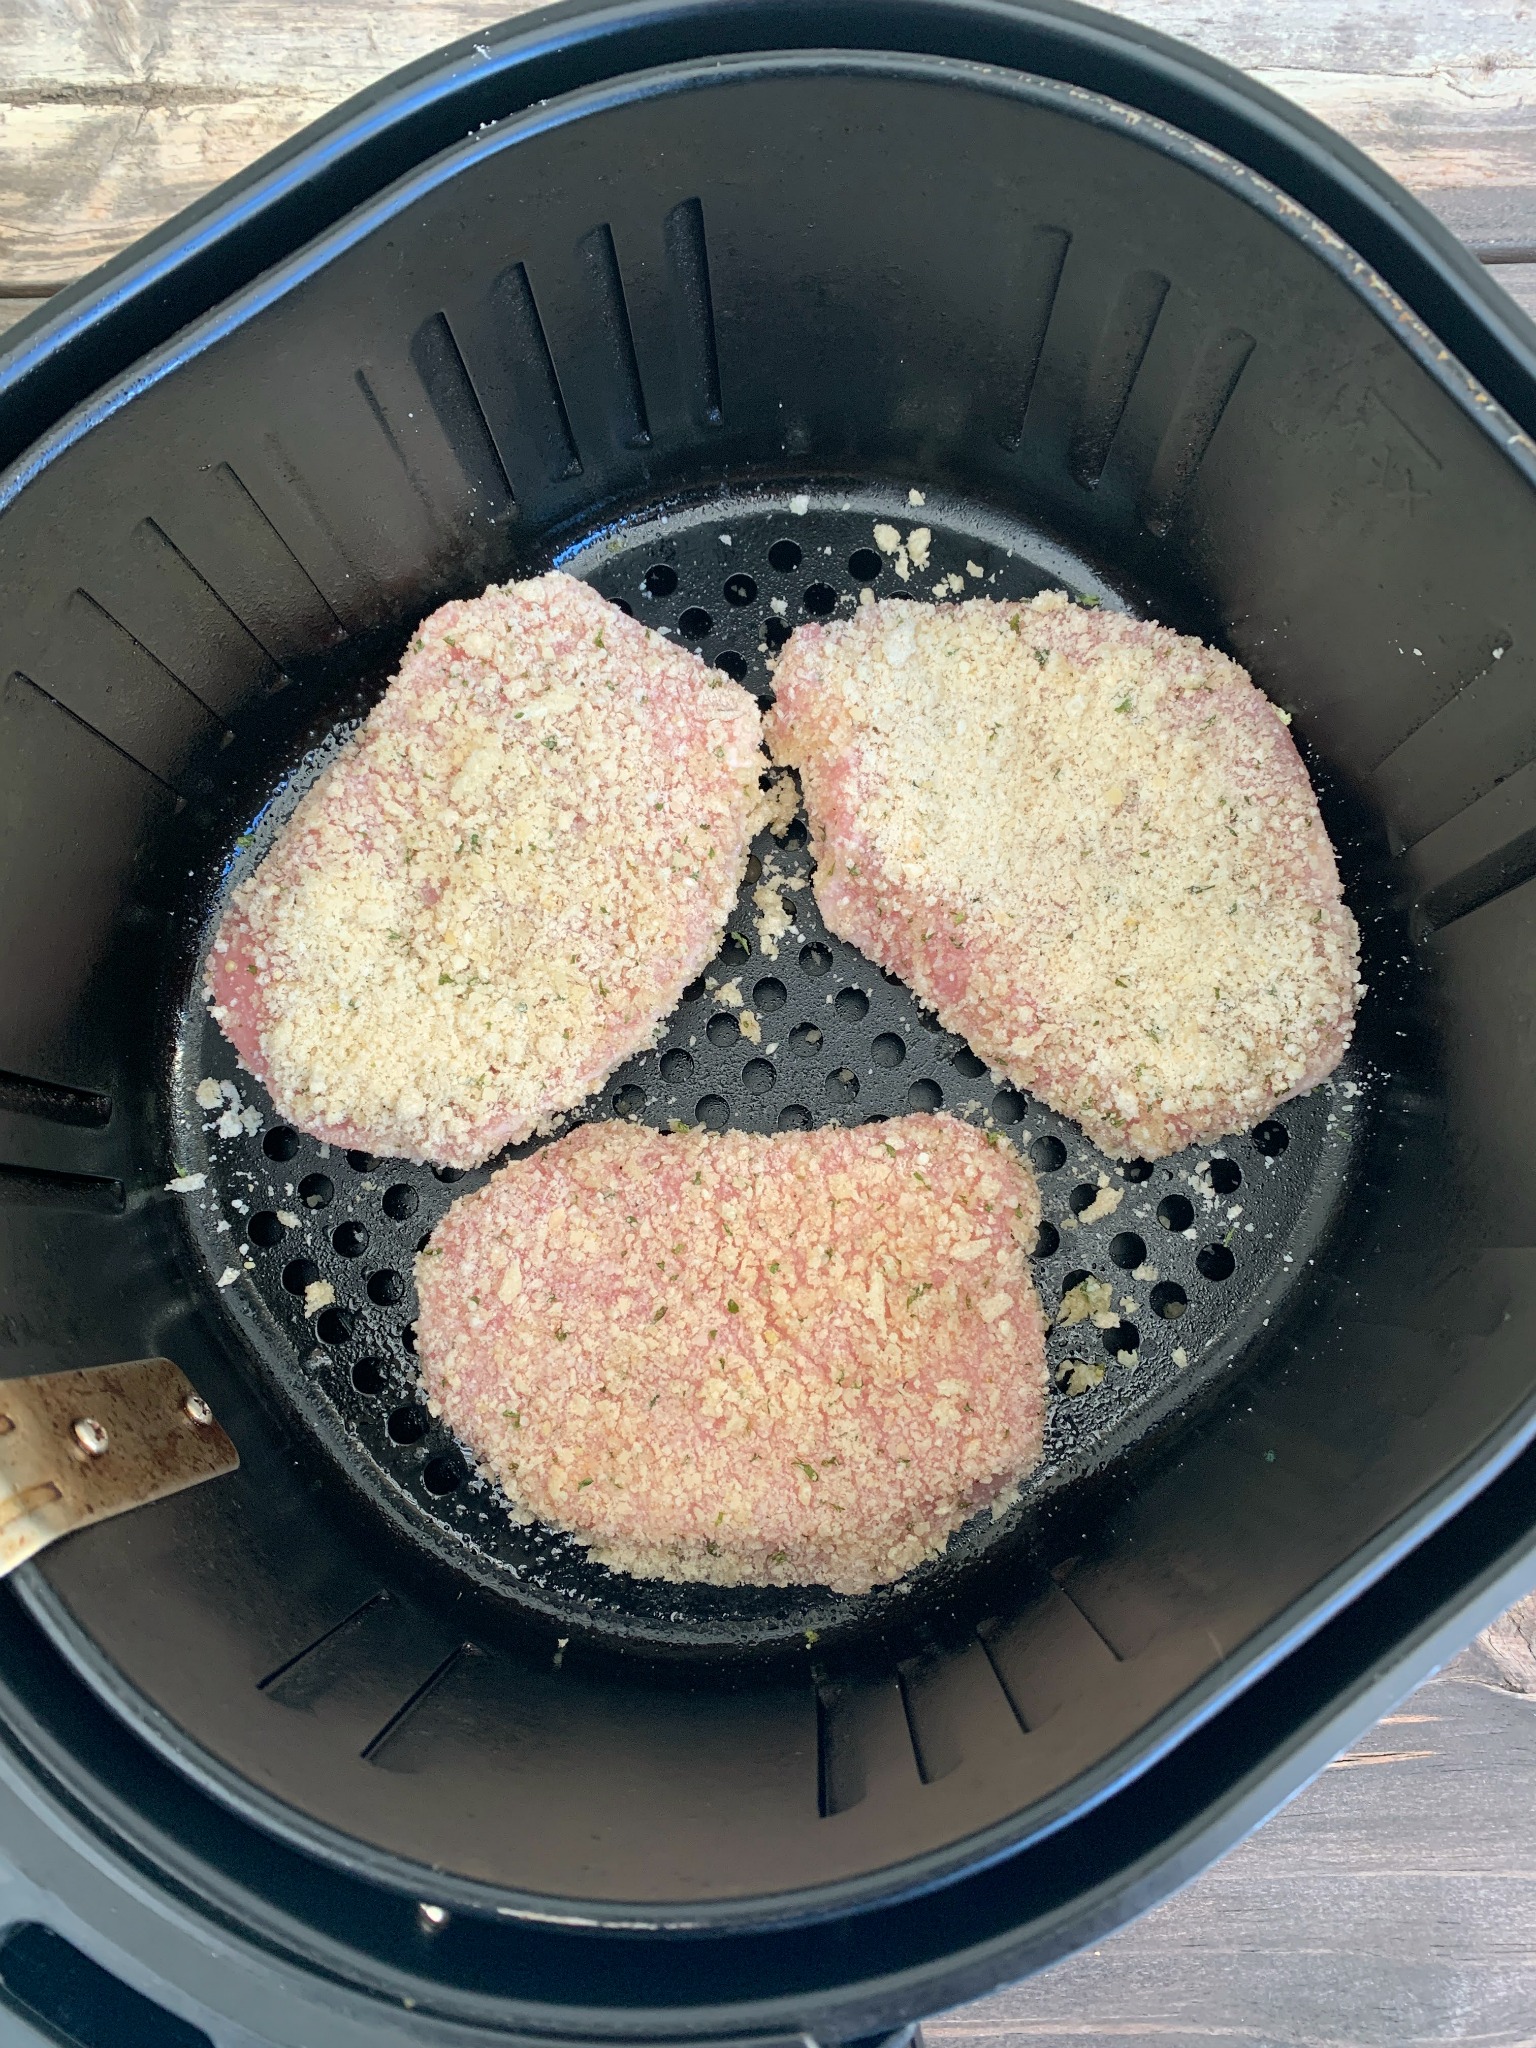 3 uncooked pork chops in the air fryer basket